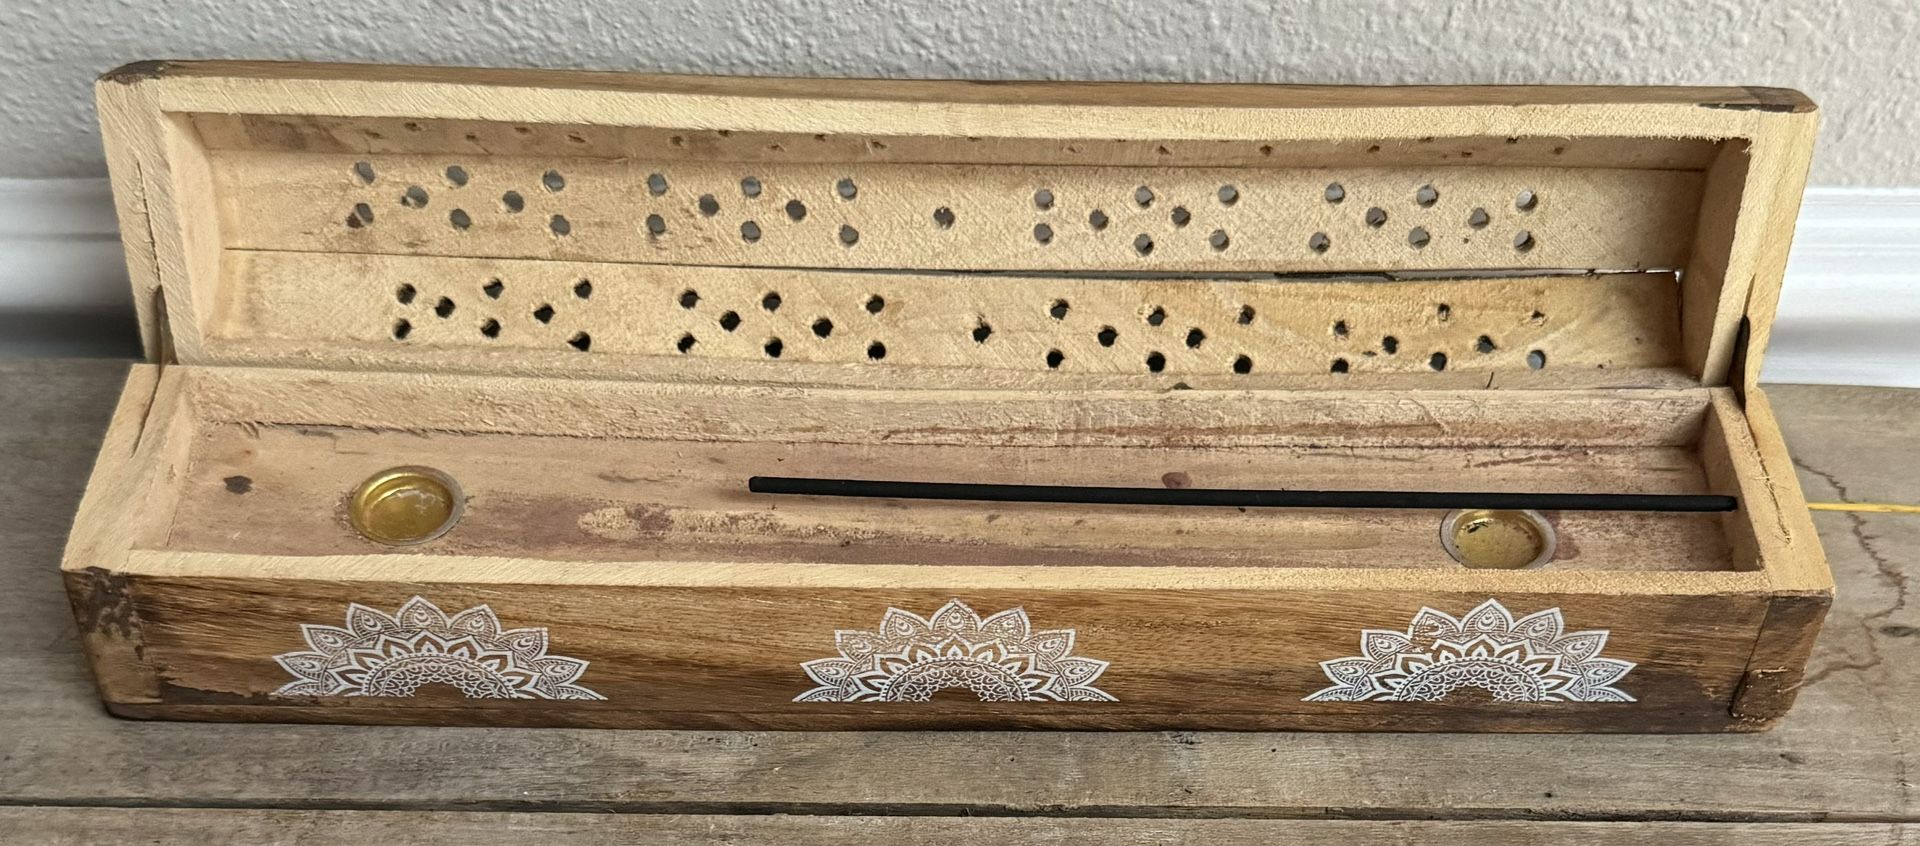 Incense Burner with Built in Storage for Sticks just $5 xox